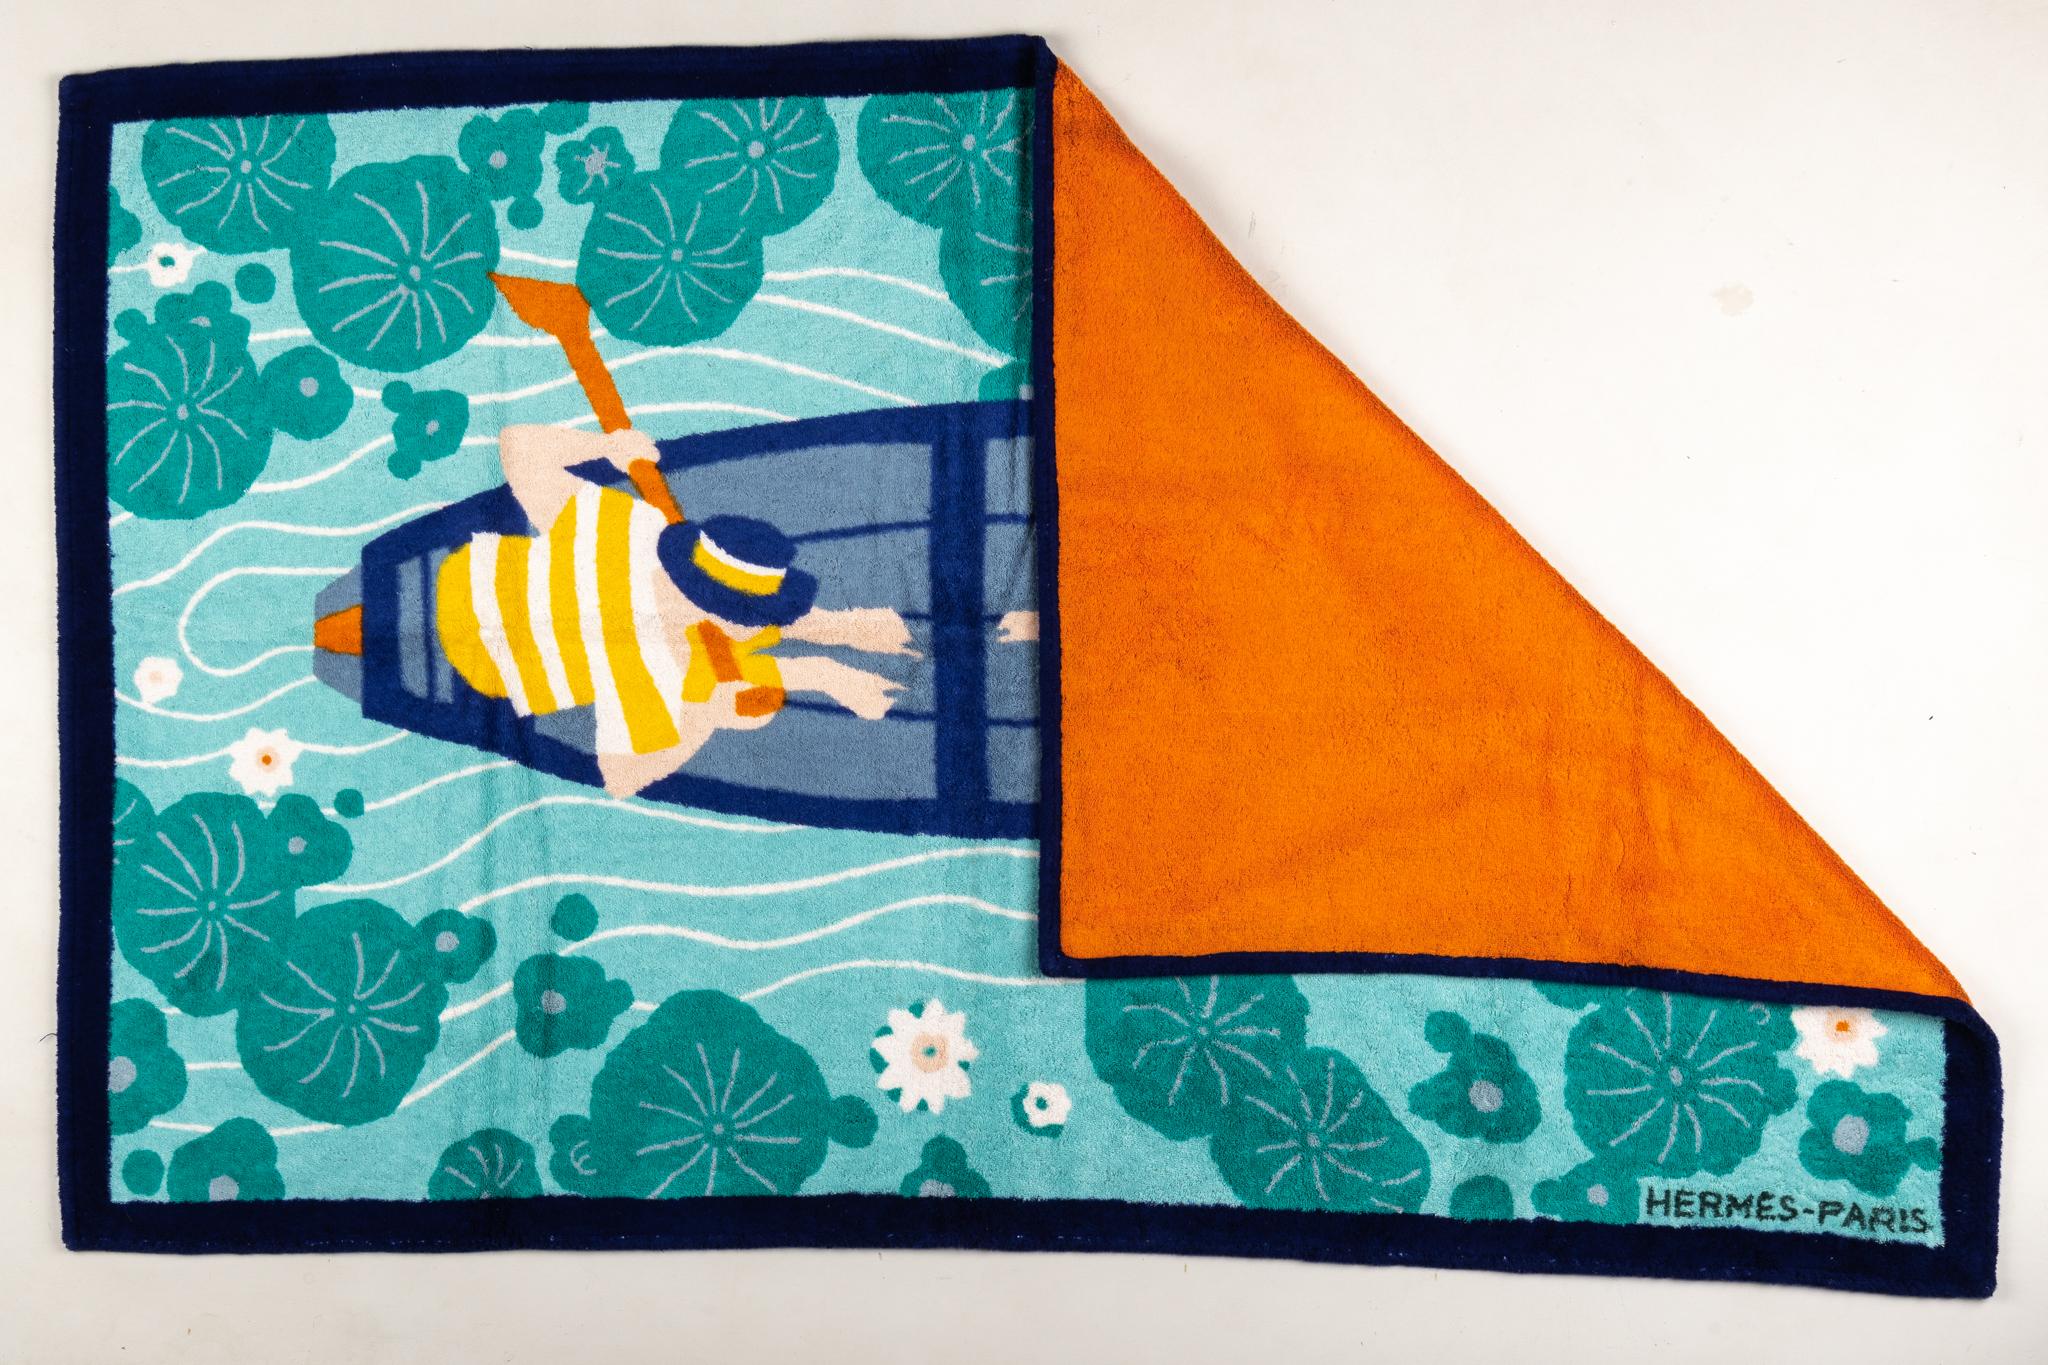 Hermes very collectible beach towel. 100% cotton terry cloth with rowing boat design. New , never used